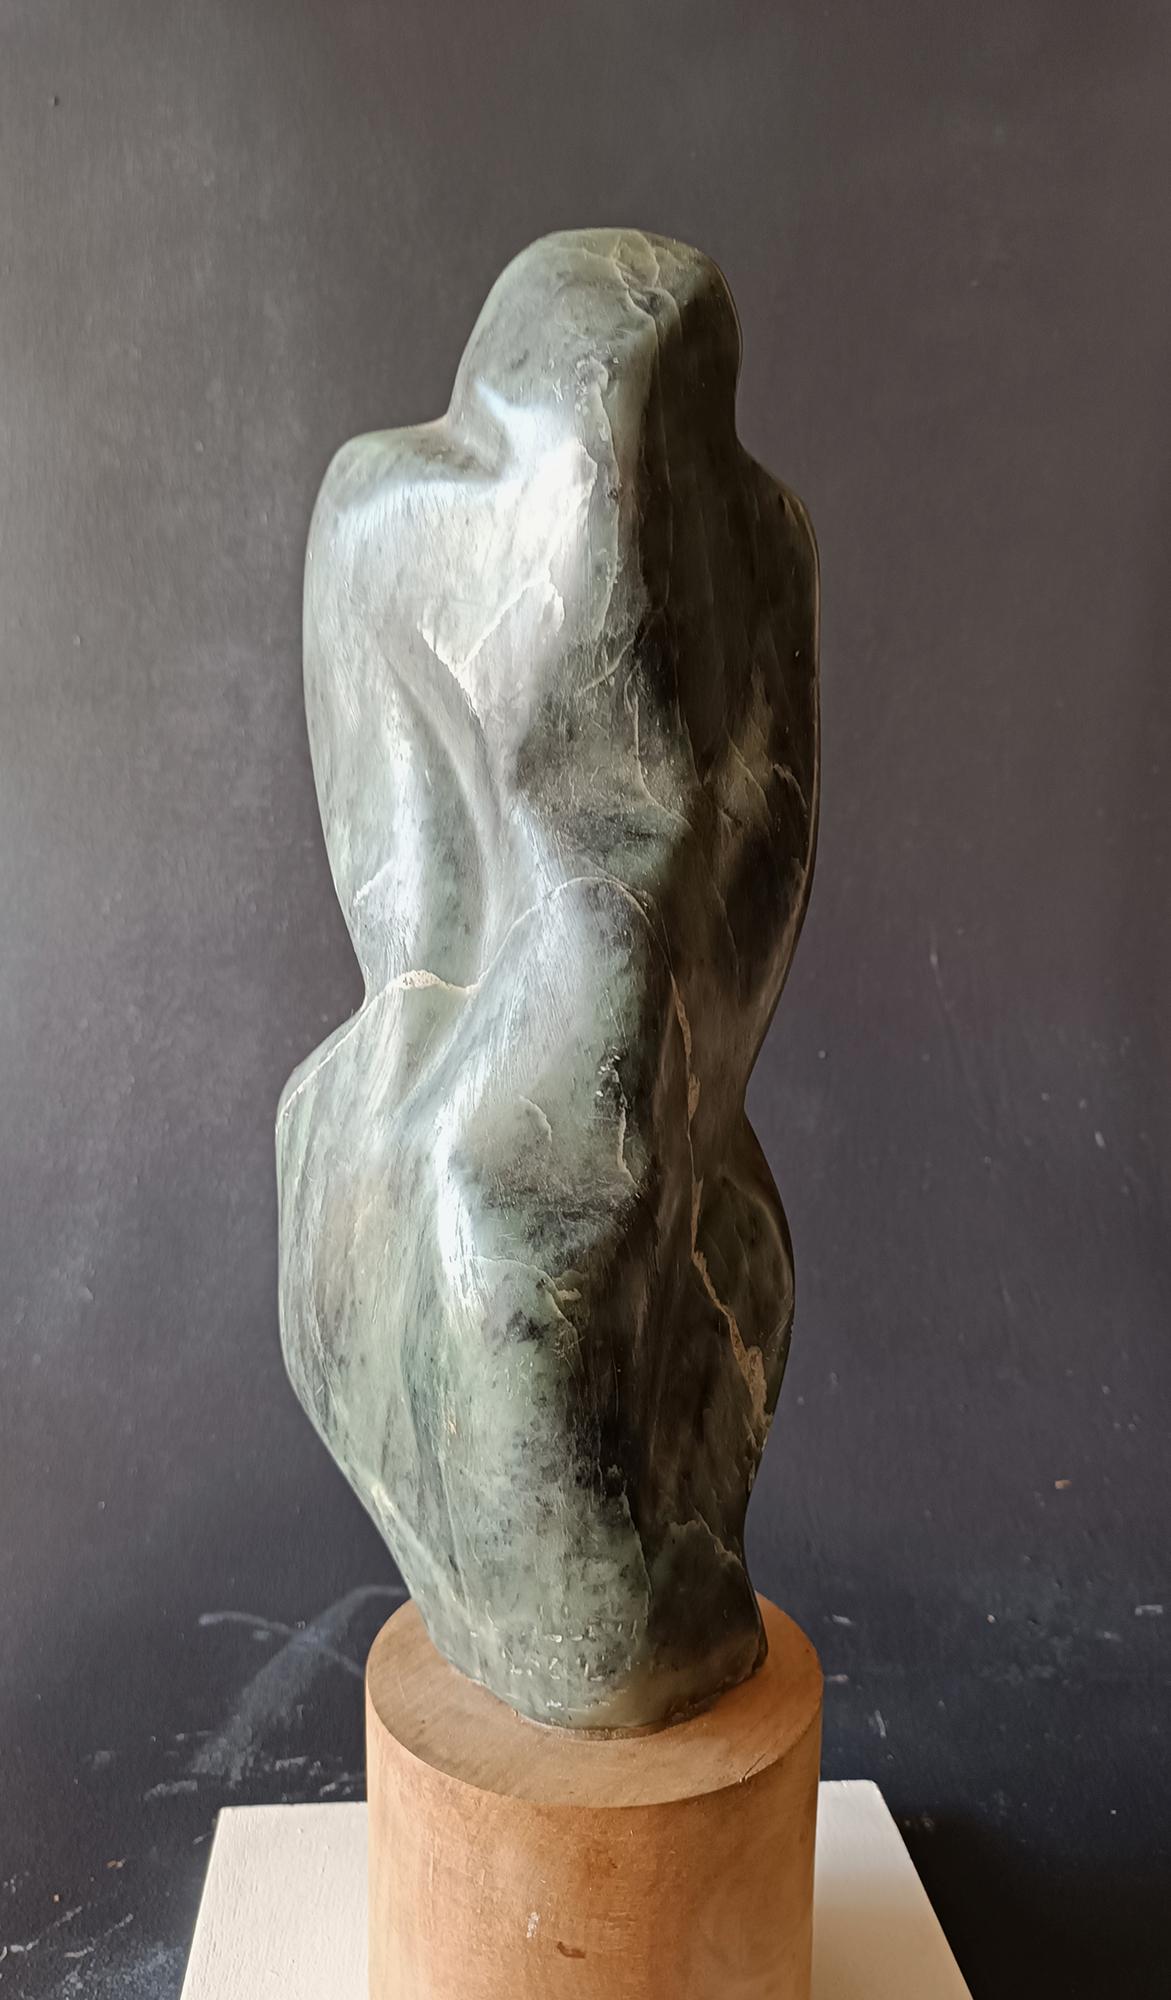 The shadow is a unique stone sculpture by contemporary artist Yann Guillon, dimensions are 36 × 10 × 16 cm (14.2 × 3.9 × 6.3 in). This artwork is sold with a wooden base.
The sculpture is signed and comes with a certificate of authenticity.

Yann